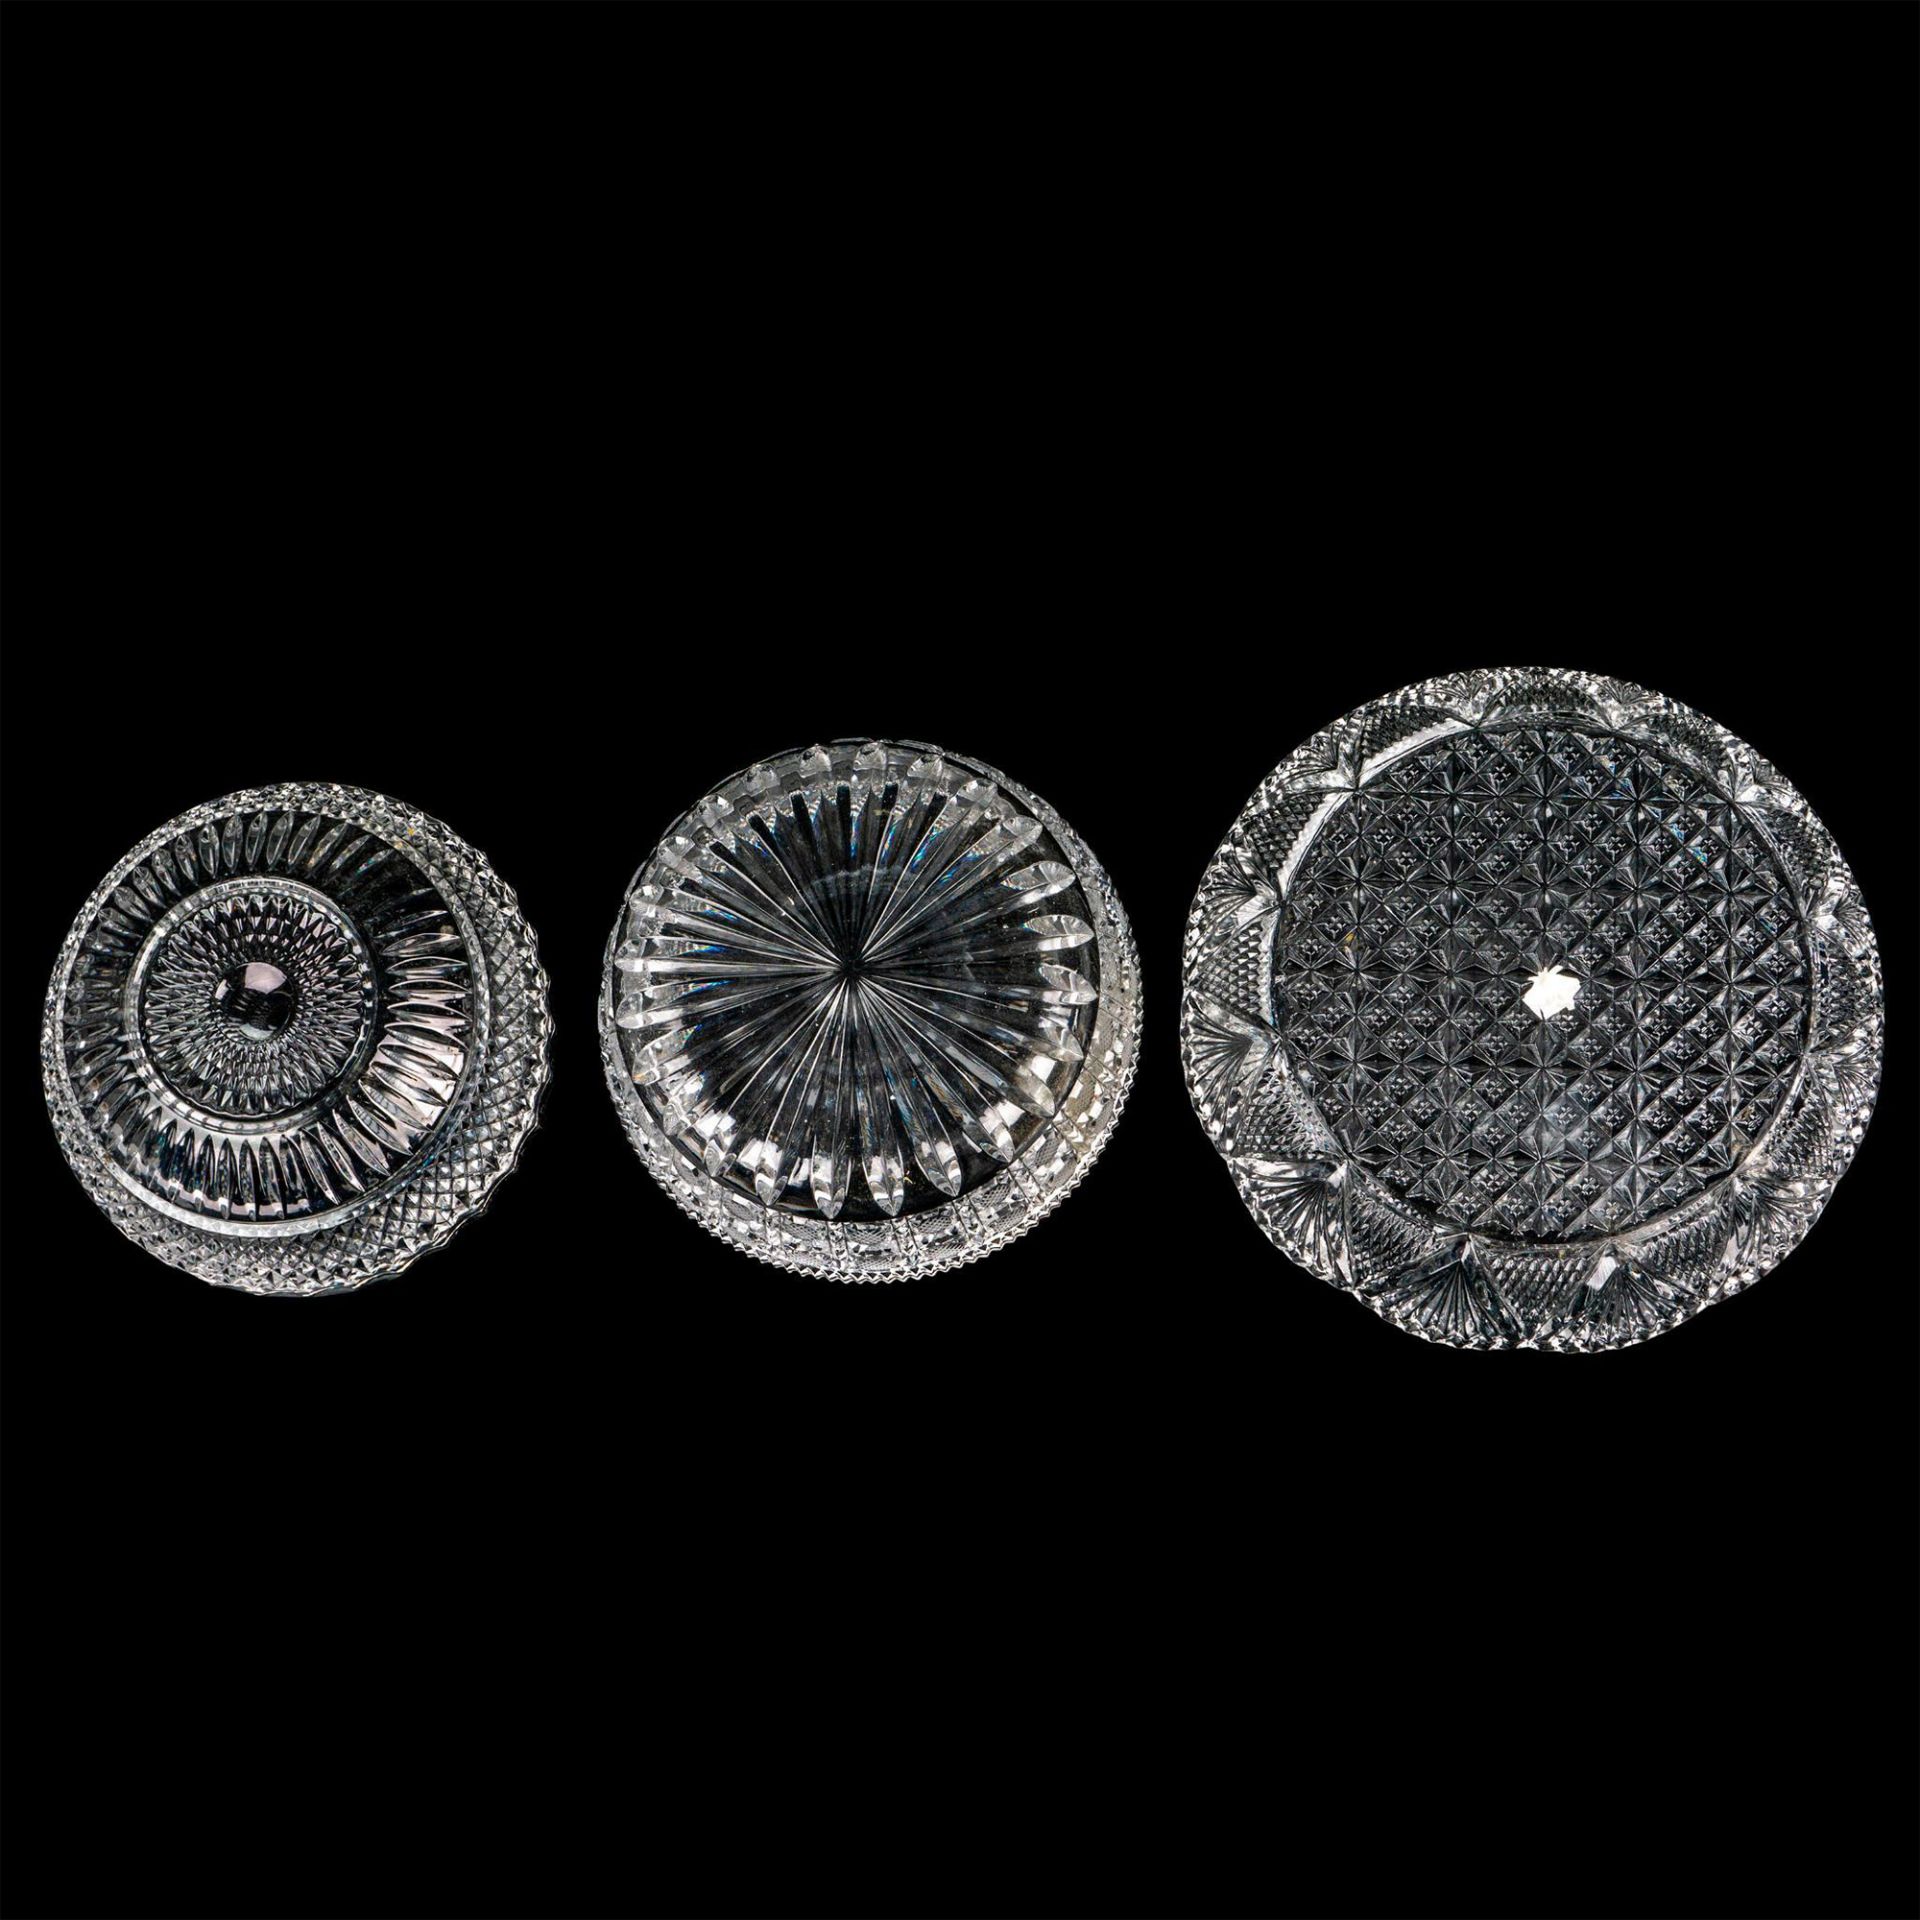 3pc Cut Glass Grouping of Bowls - Image 2 of 2